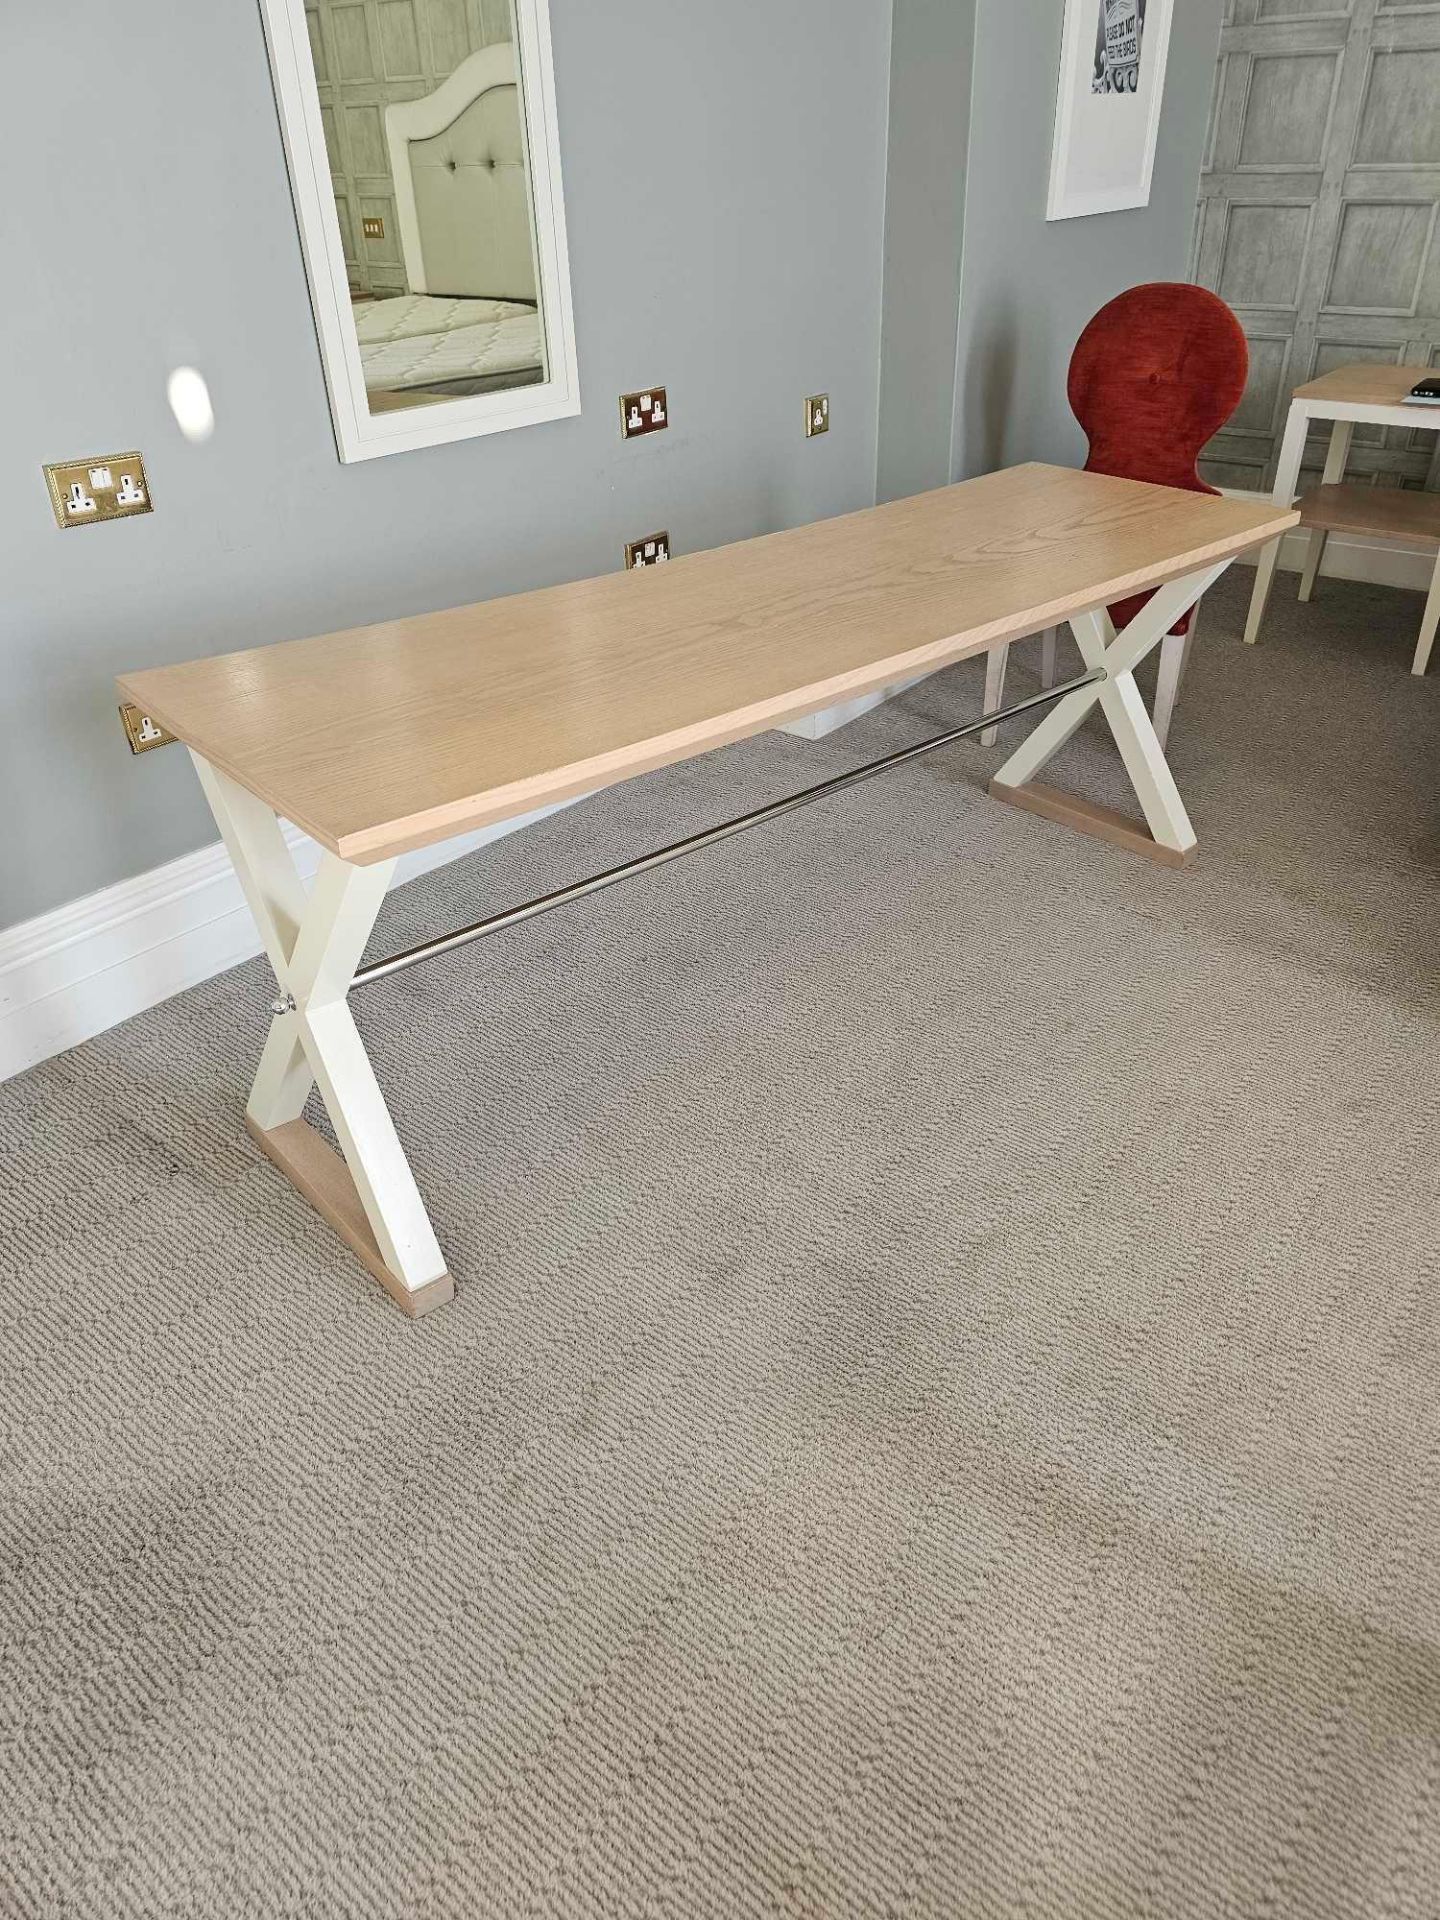 Table Featuring A White Painted Frame, Limed Oak Top, And Chrome Support Stretchers, This Sturdy - Image 2 of 3